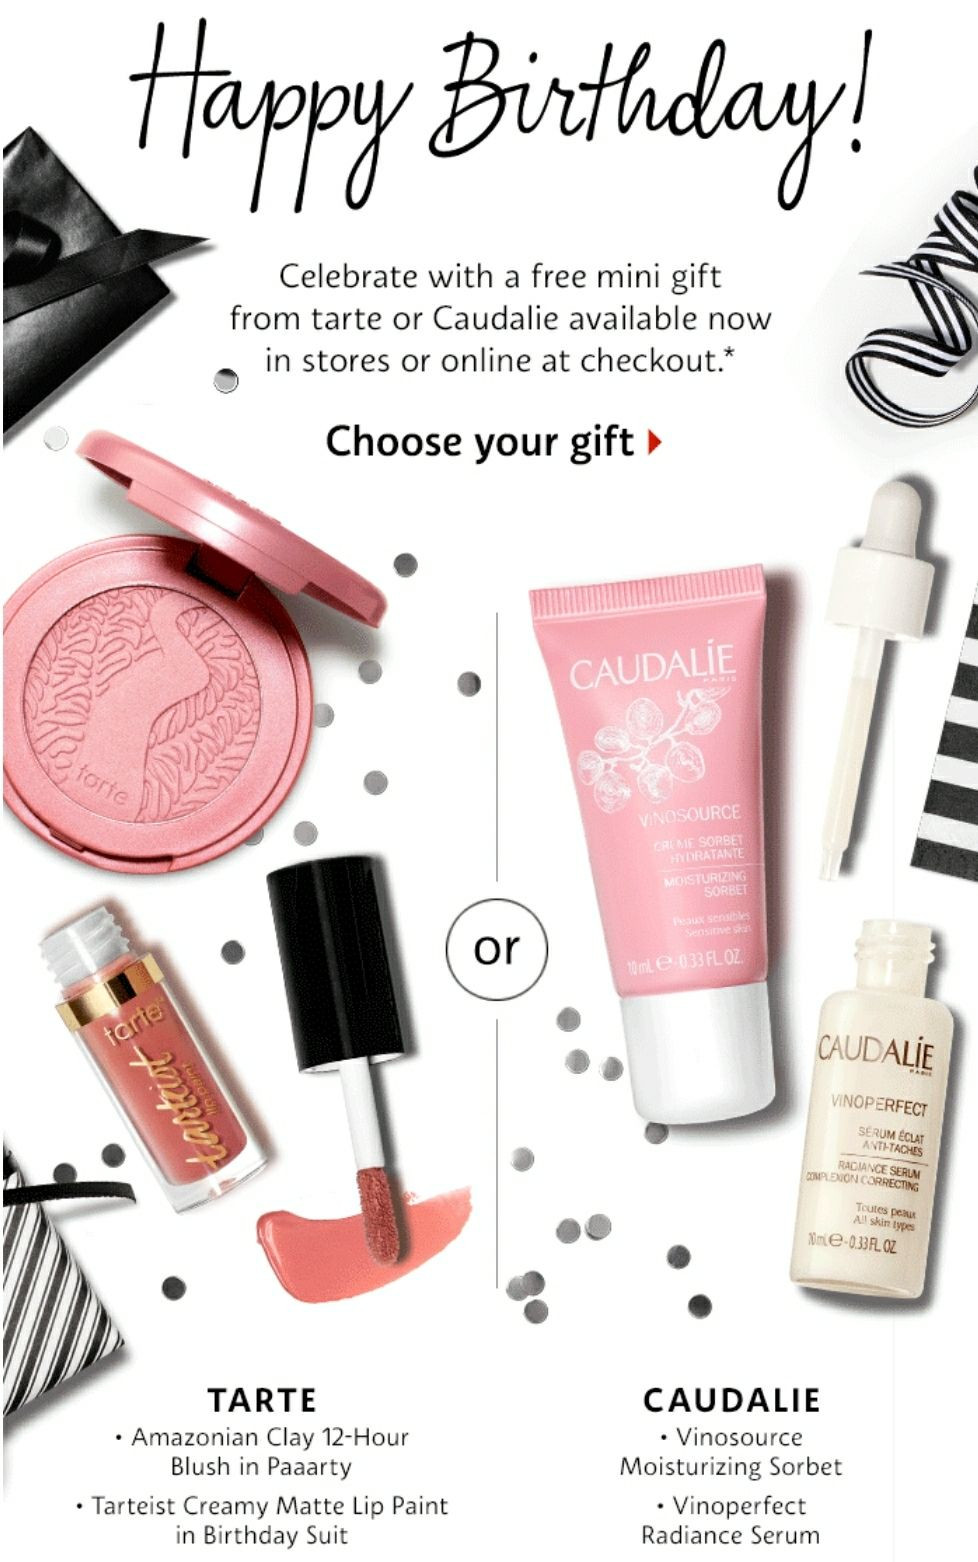 The Best Ideas for Sephora Birthday Gift Online Home, Family, Style